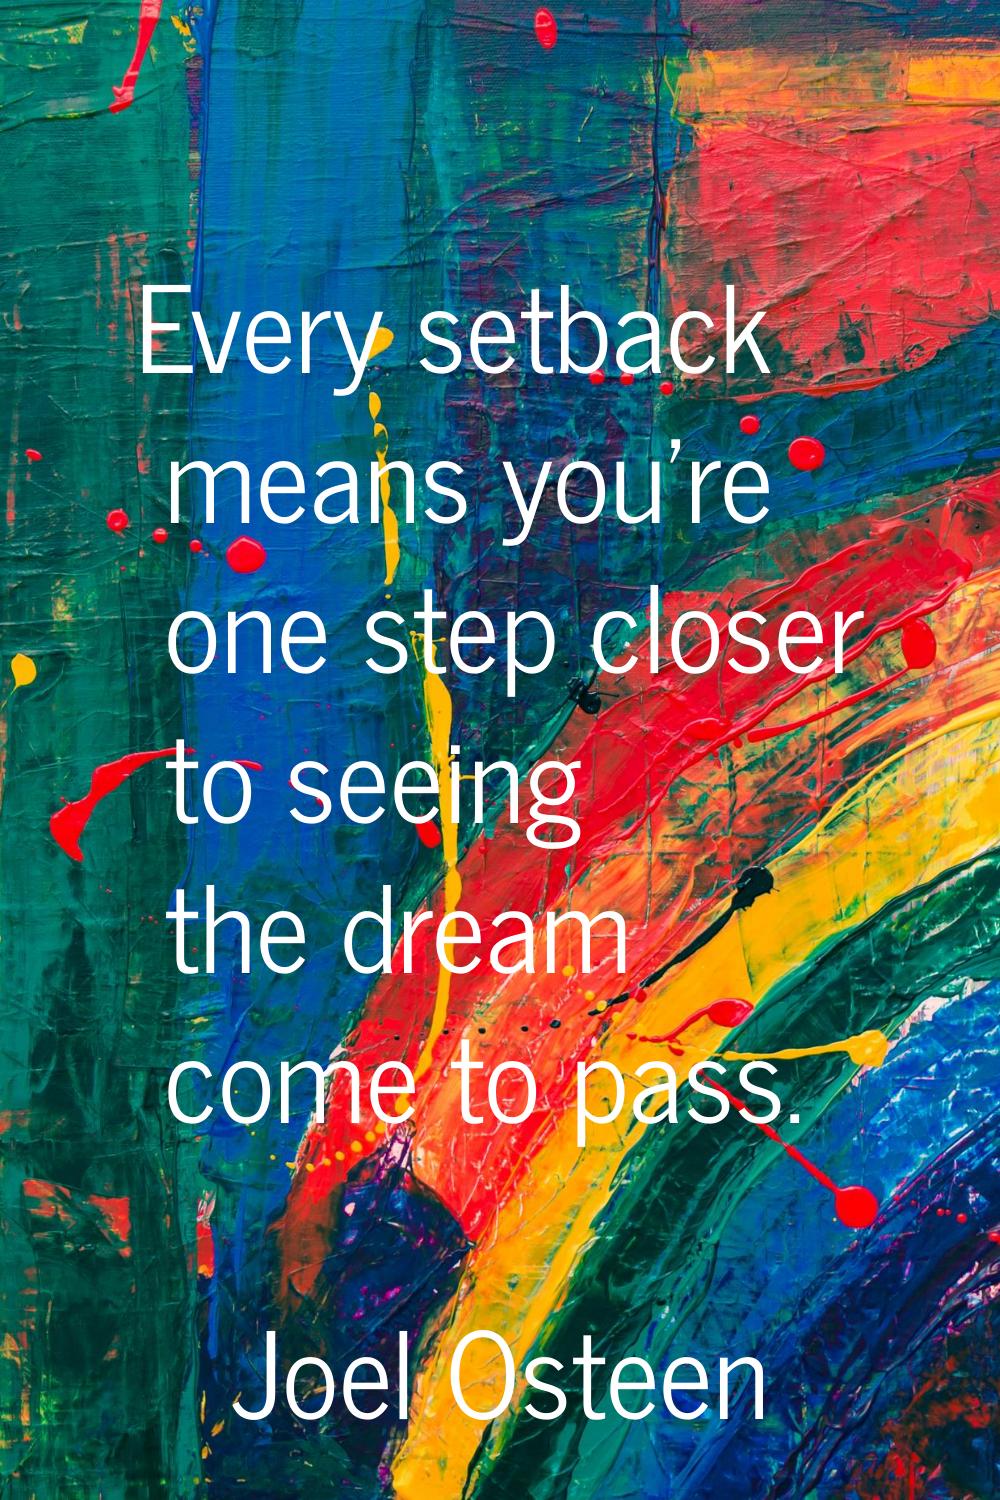 Every setback means you're one step closer to seeing the dream come to pass.